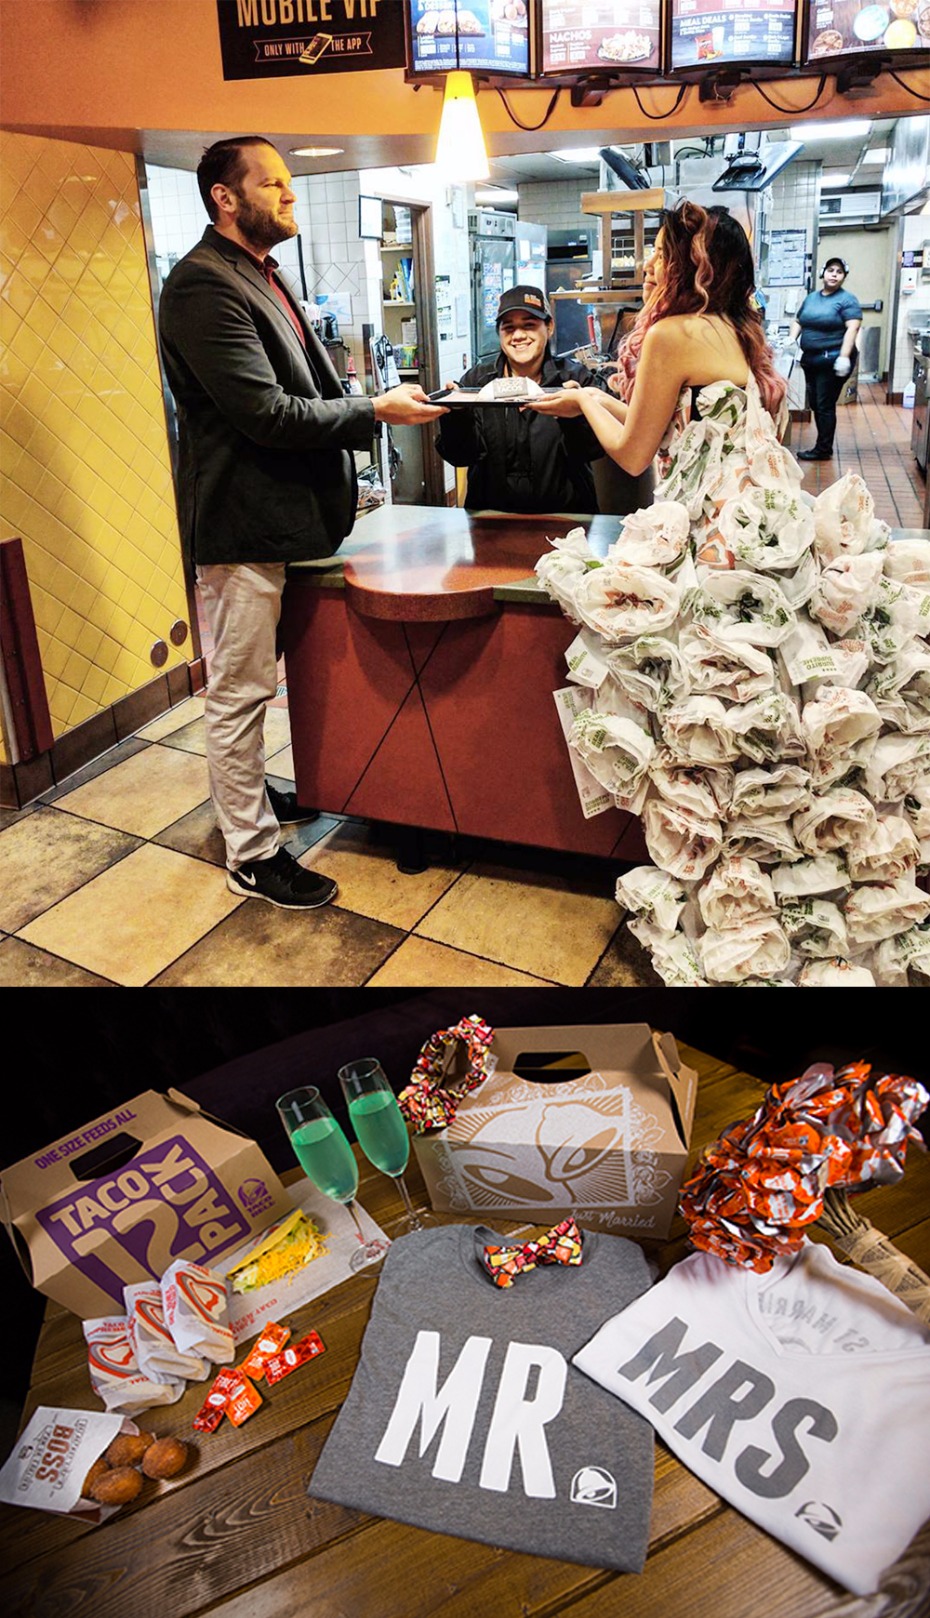 get married at Taco Bell and be Mr. and Mrs. Taco Bell